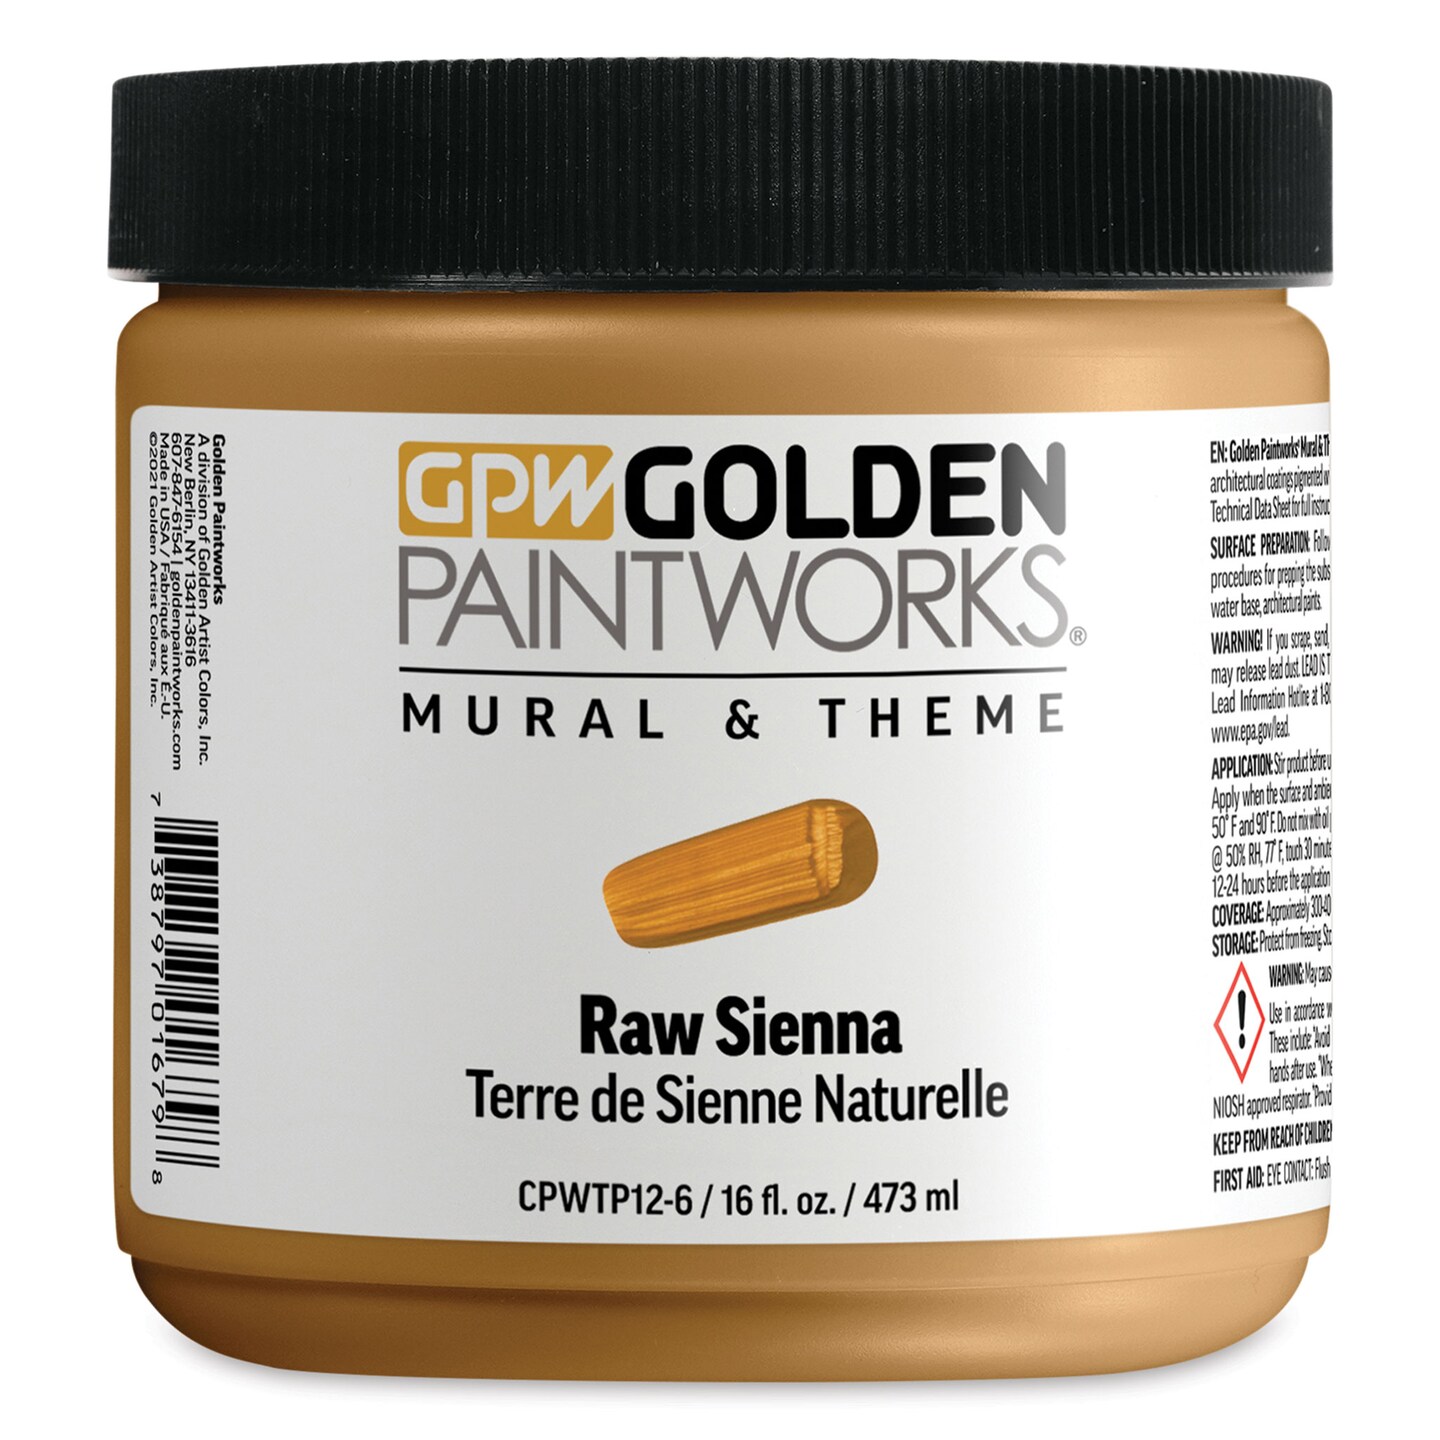 Golden Paintworks Mural and Theme Acrylic Paint - Raw Sienna, 16 oz, Jar